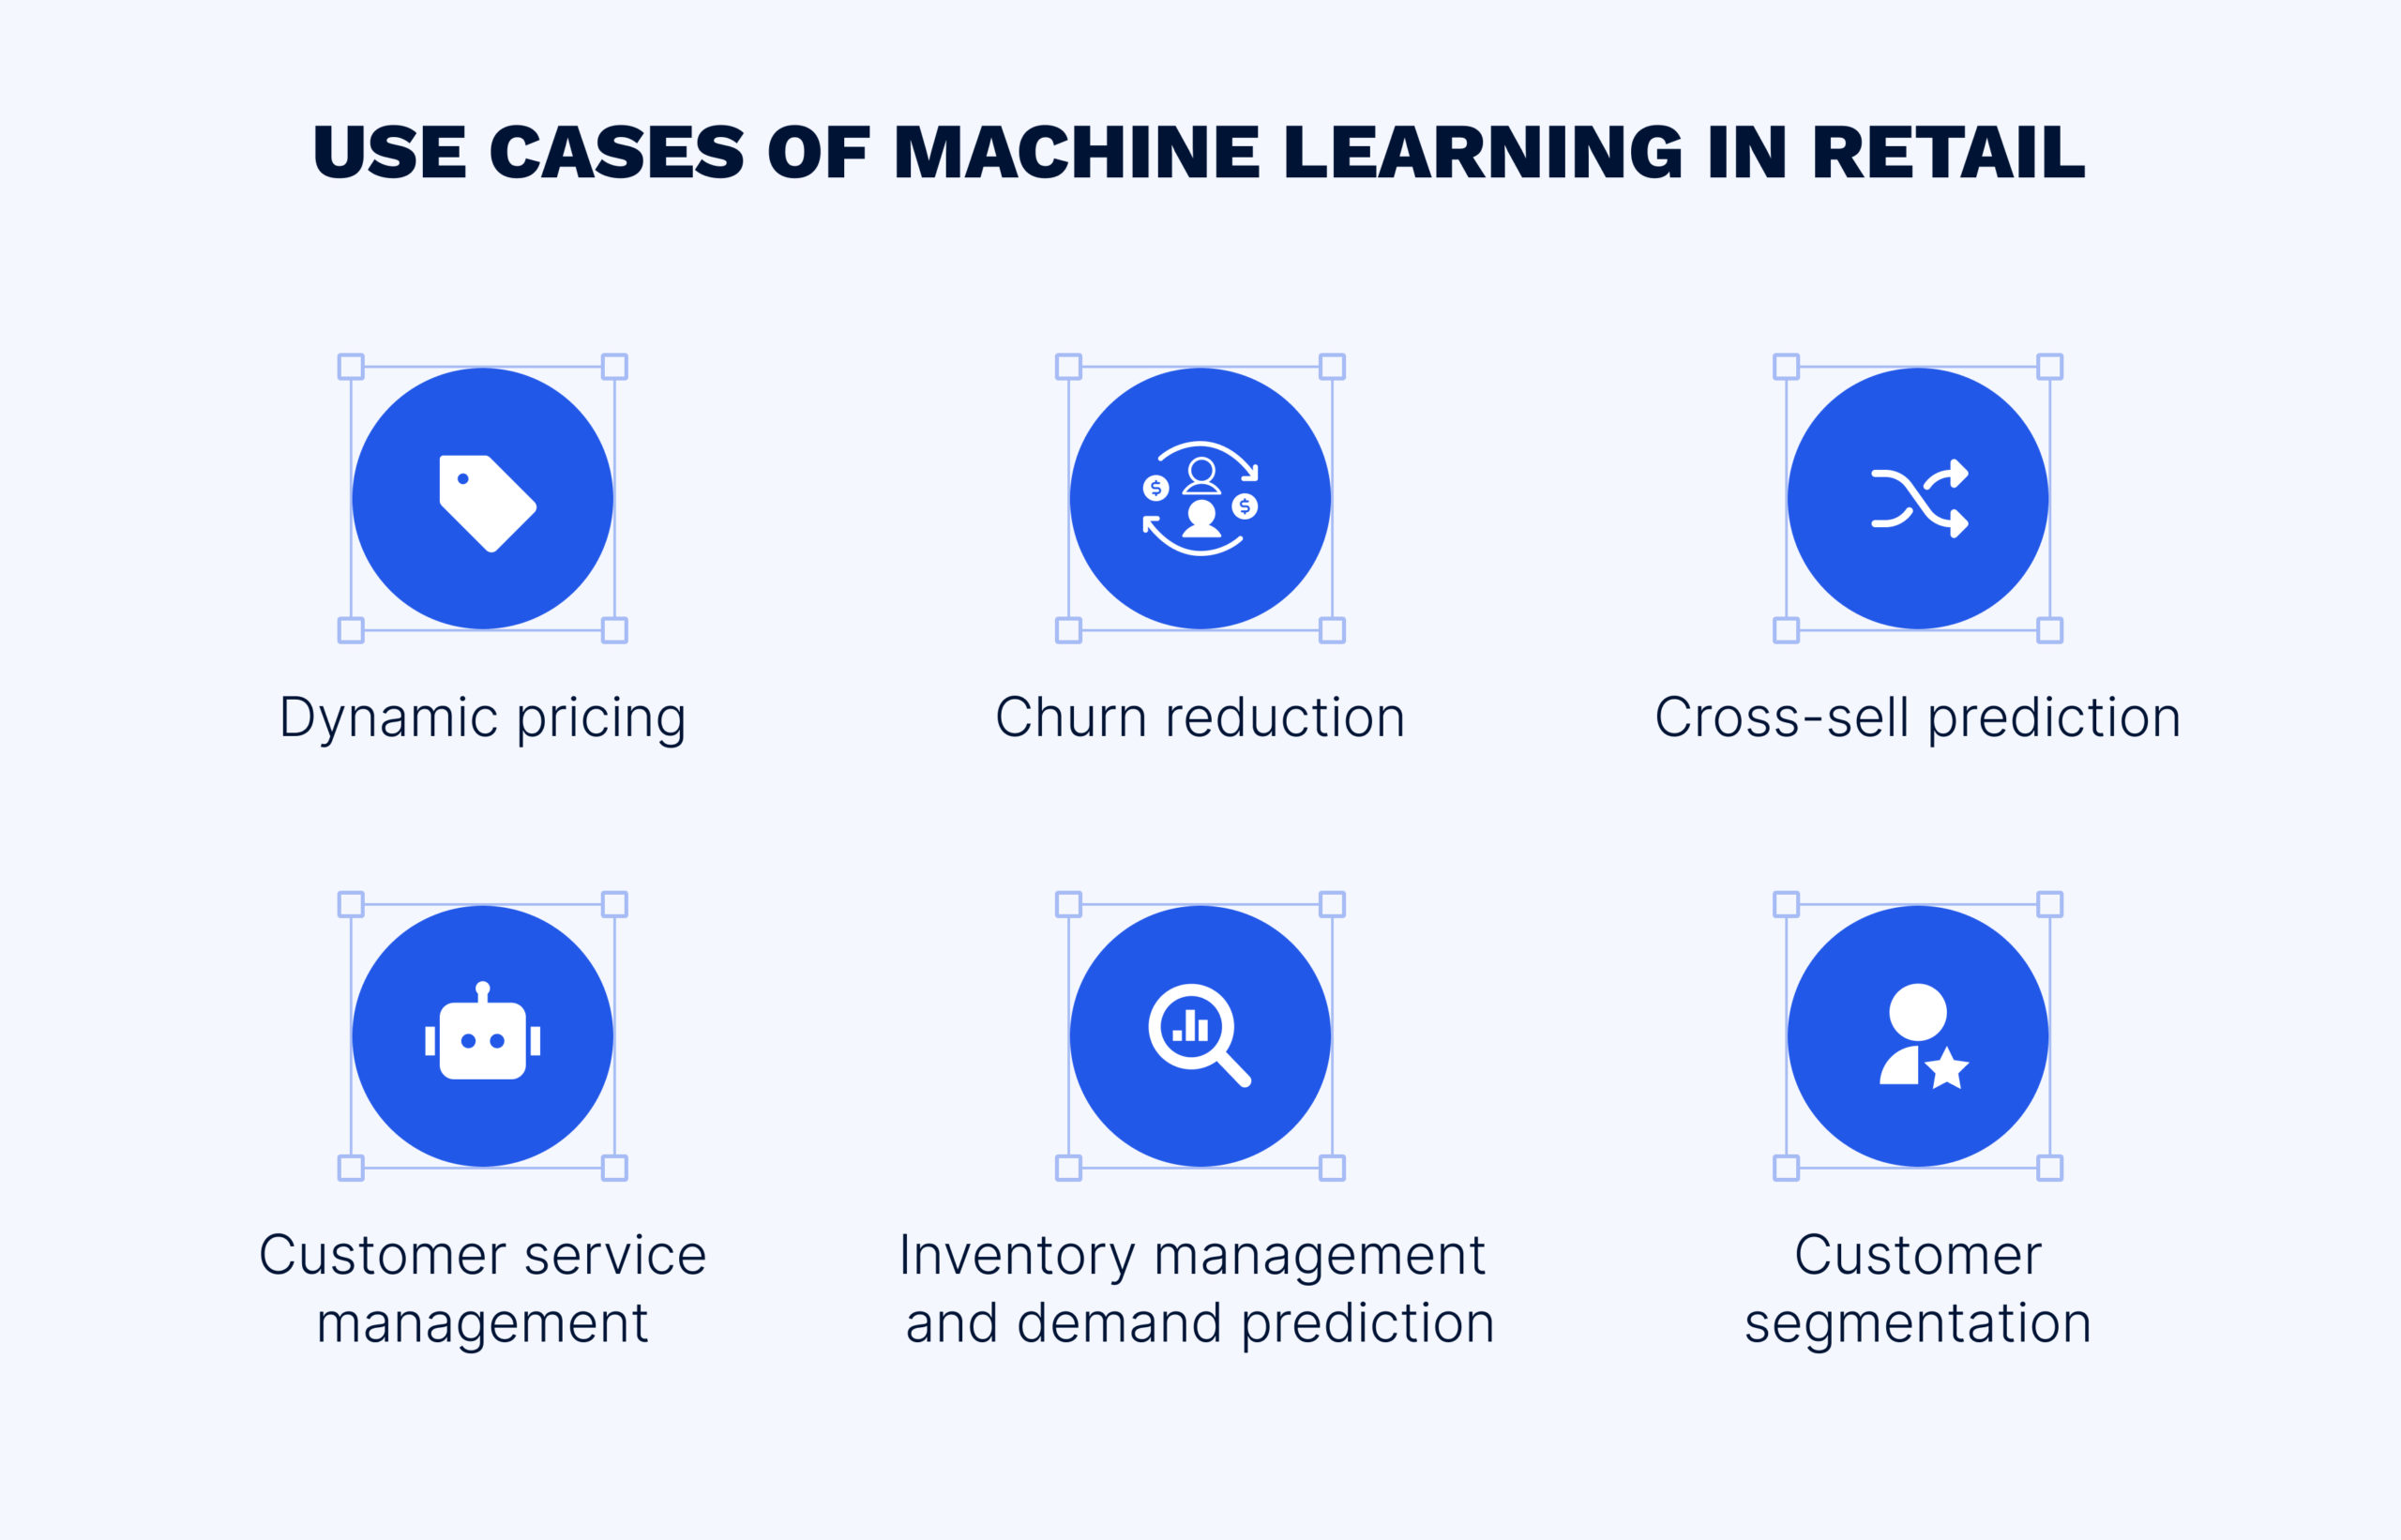 How machine learning is used in retail